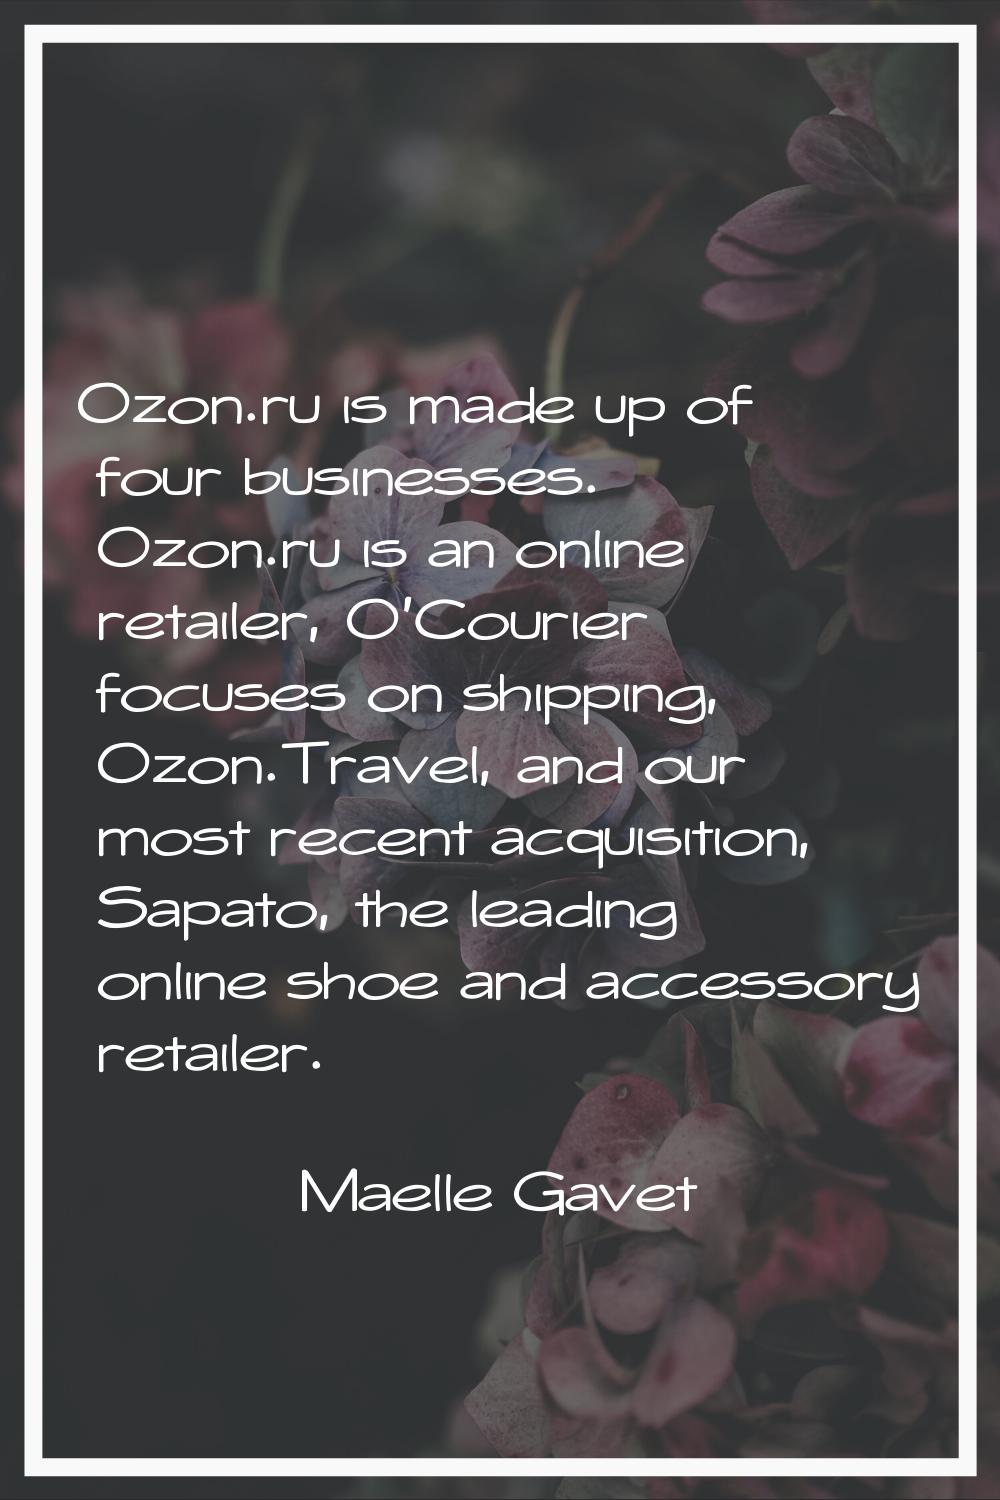 Ozon.ru is made up of four businesses. Ozon.ru is an online retailer, O'Courier focuses on shipping